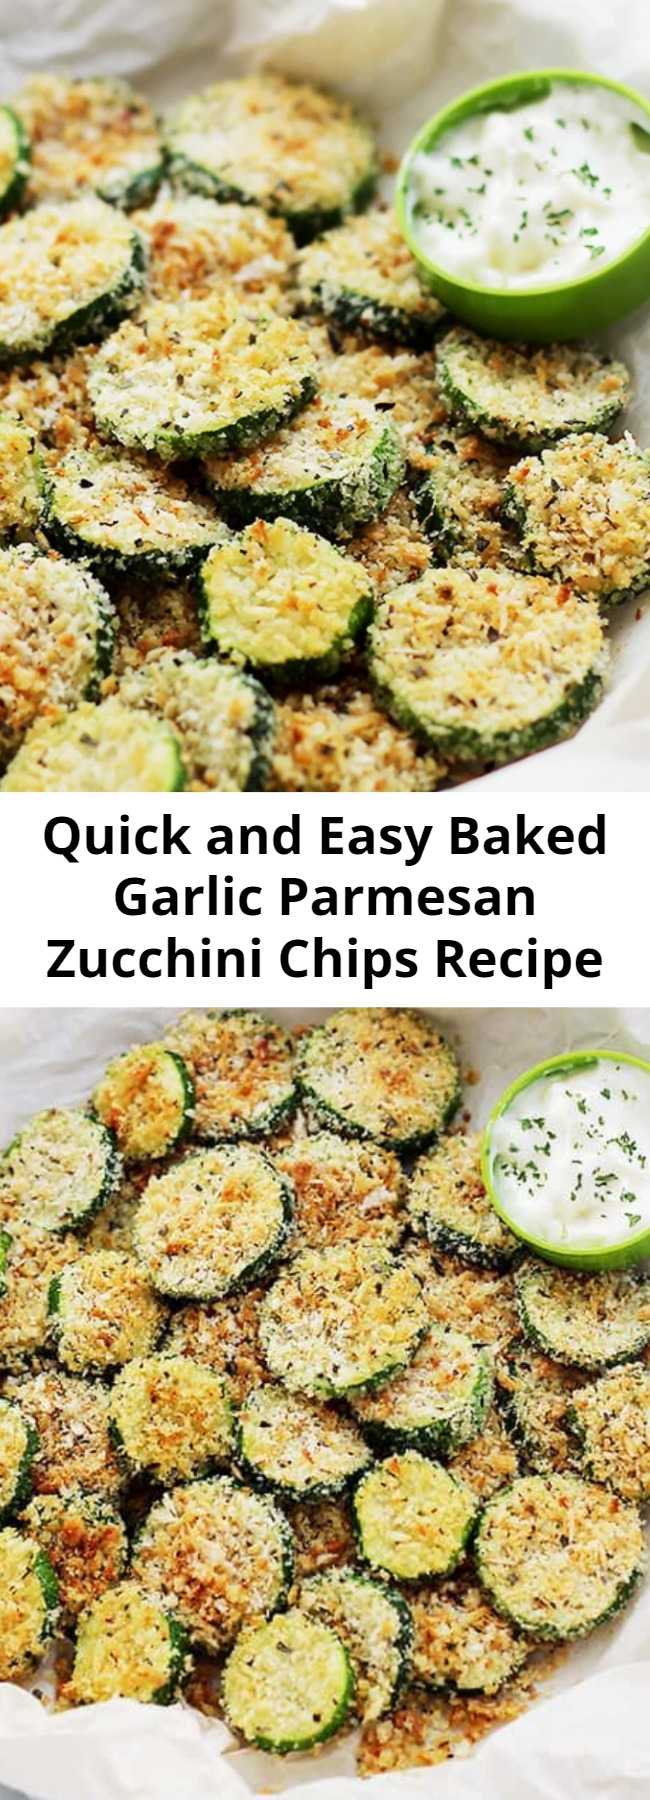 Quick and Easy Baked Garlic Parmesan Zucchini Chips Recipe - Crispy and flavorful baked zucchini chips covered in seasoned panko bread crumbs with garlic and Parmesan. #zucchini #chips #healthyrecipes